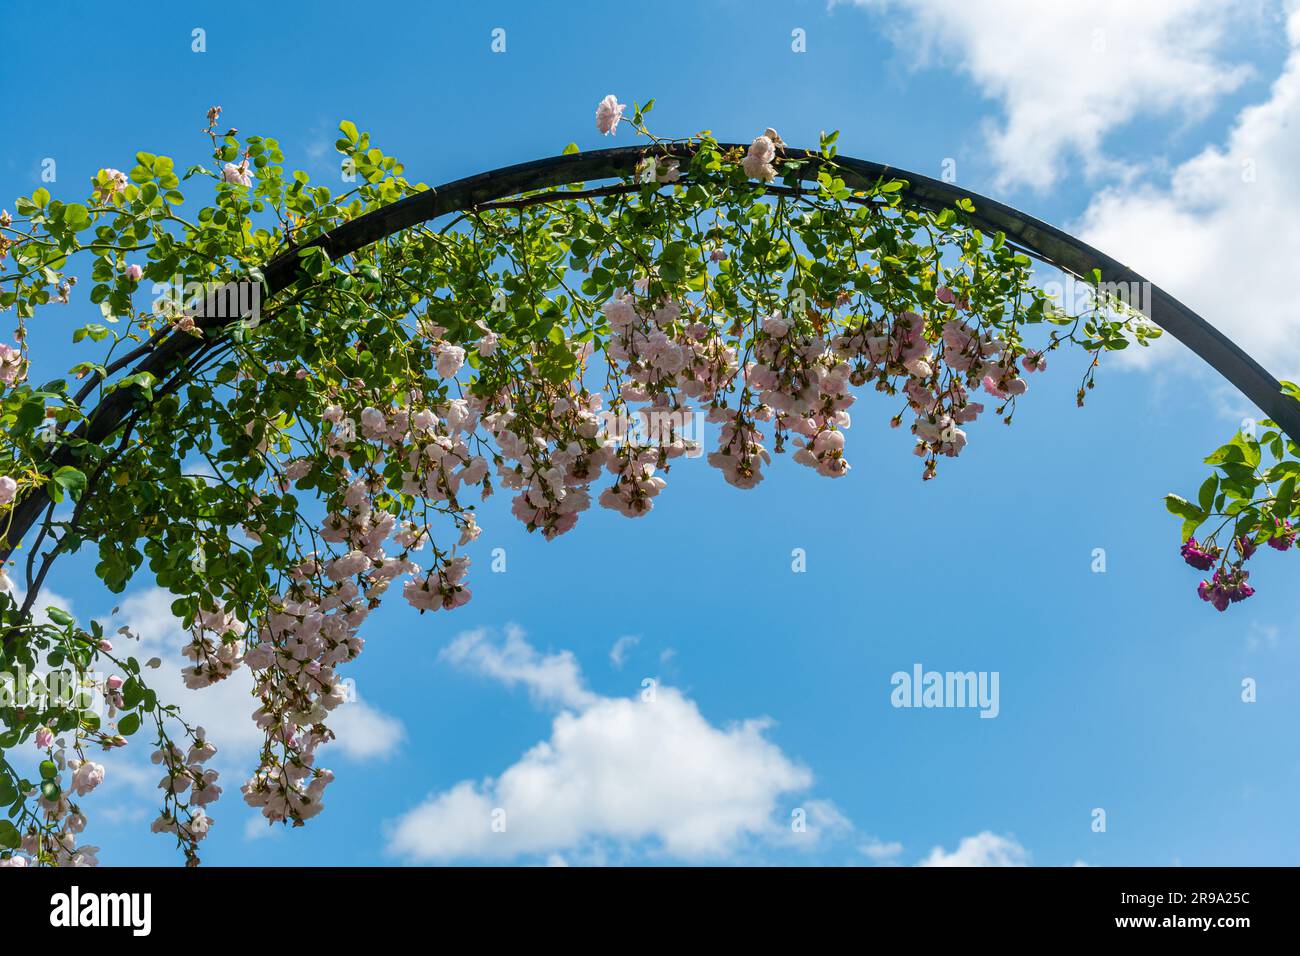 Pale pink rambling rose growing over a metal arch in a garden during June or summer against a blue sky, Hampshire, England, UK Stock Photo